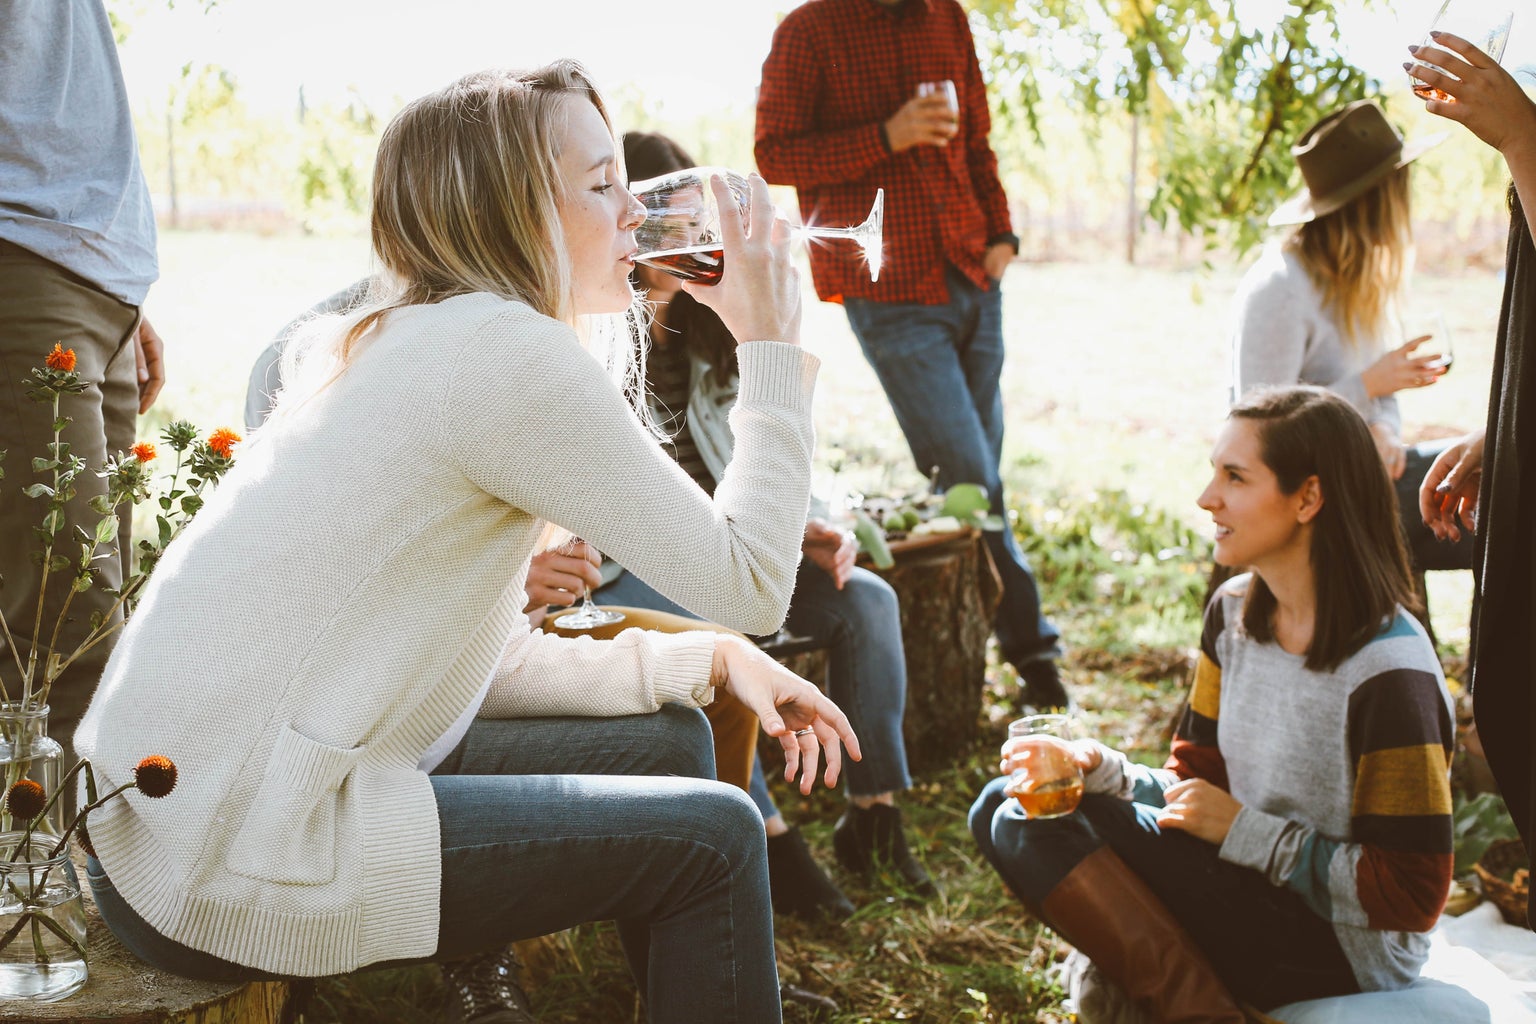 Girl drinking wine with friends